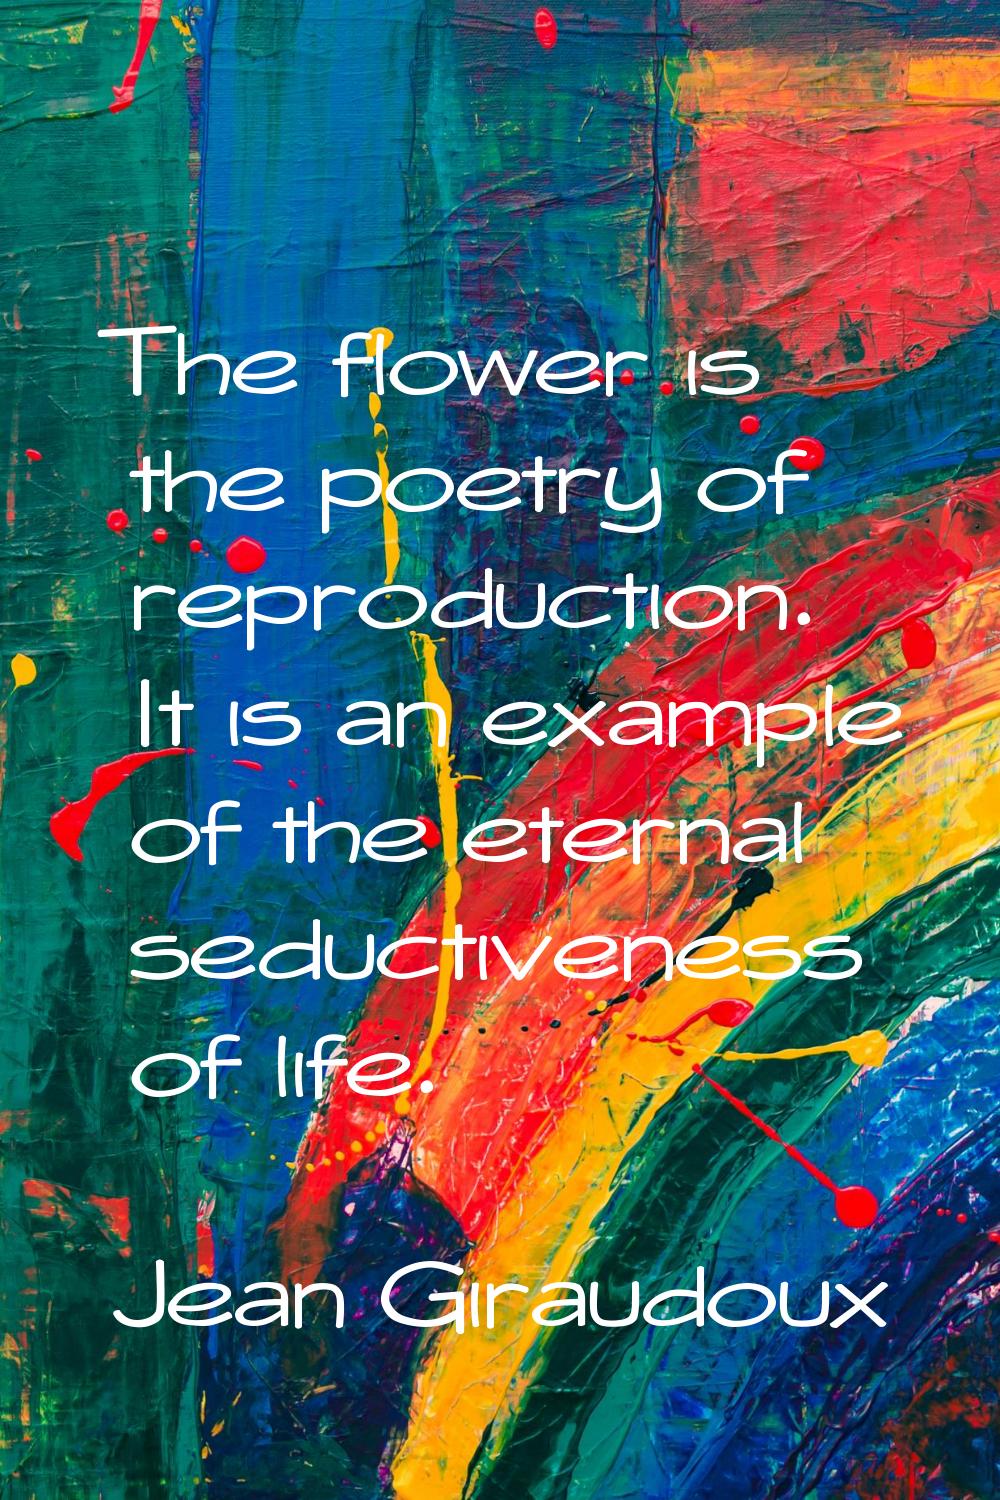 The flower is the poetry of reproduction. It is an example of the eternal seductiveness of life.